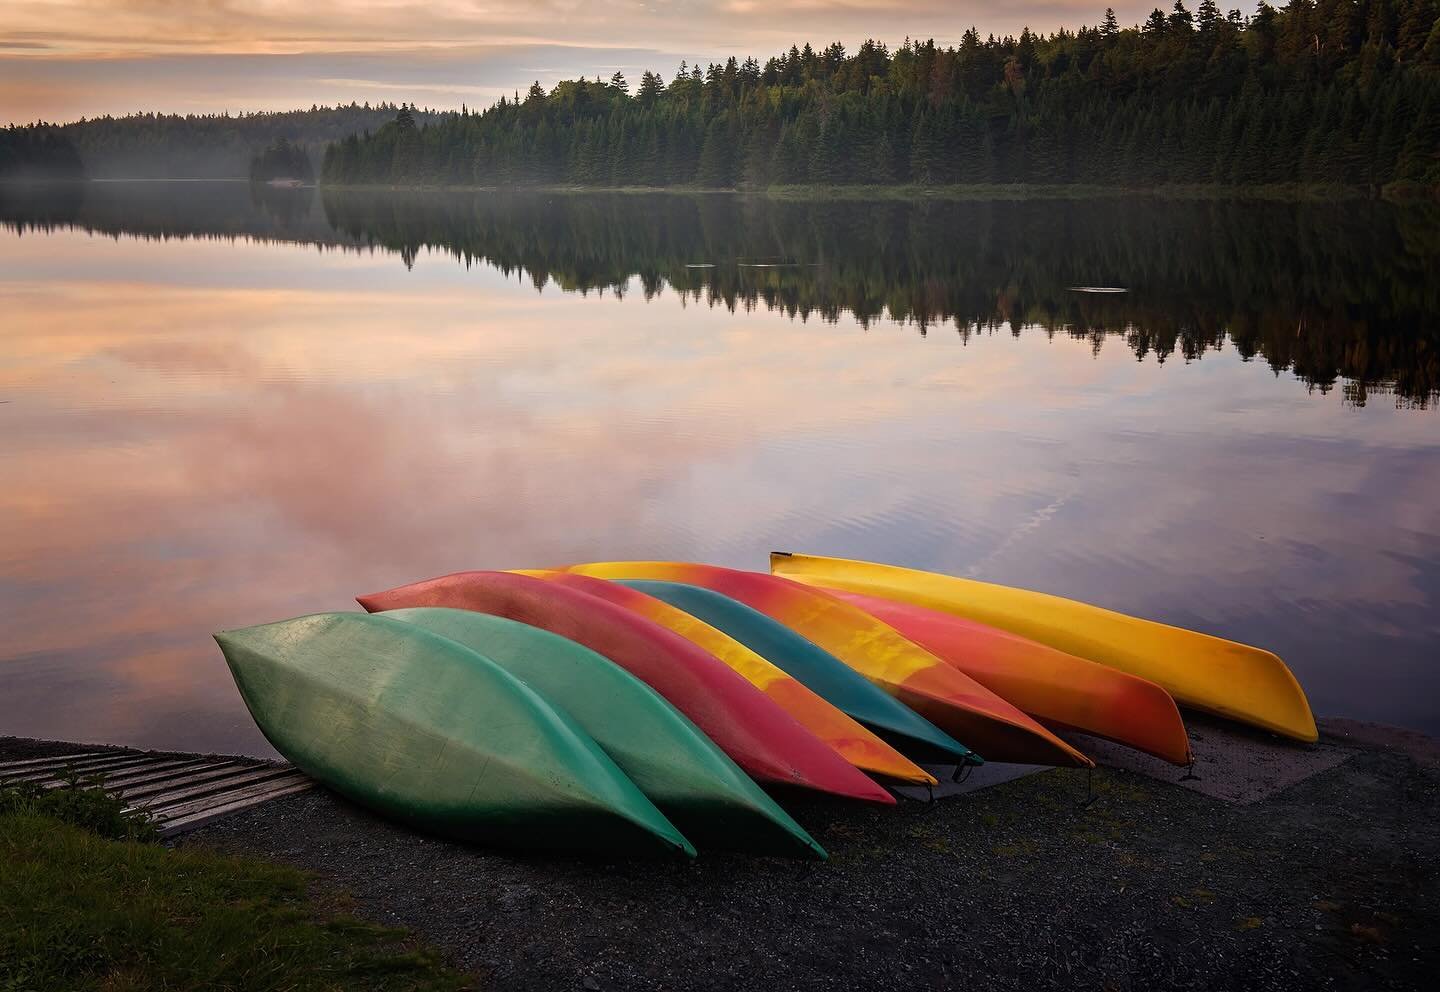 A beautiful, serene moment while we were camping in Fundy National Park, NB. We went to Bennett Lake for sunset, and it did not disappoint! These kayaks stacked next to the lake were the perfect pop of colour in the foreground.

For me, this is a &ld